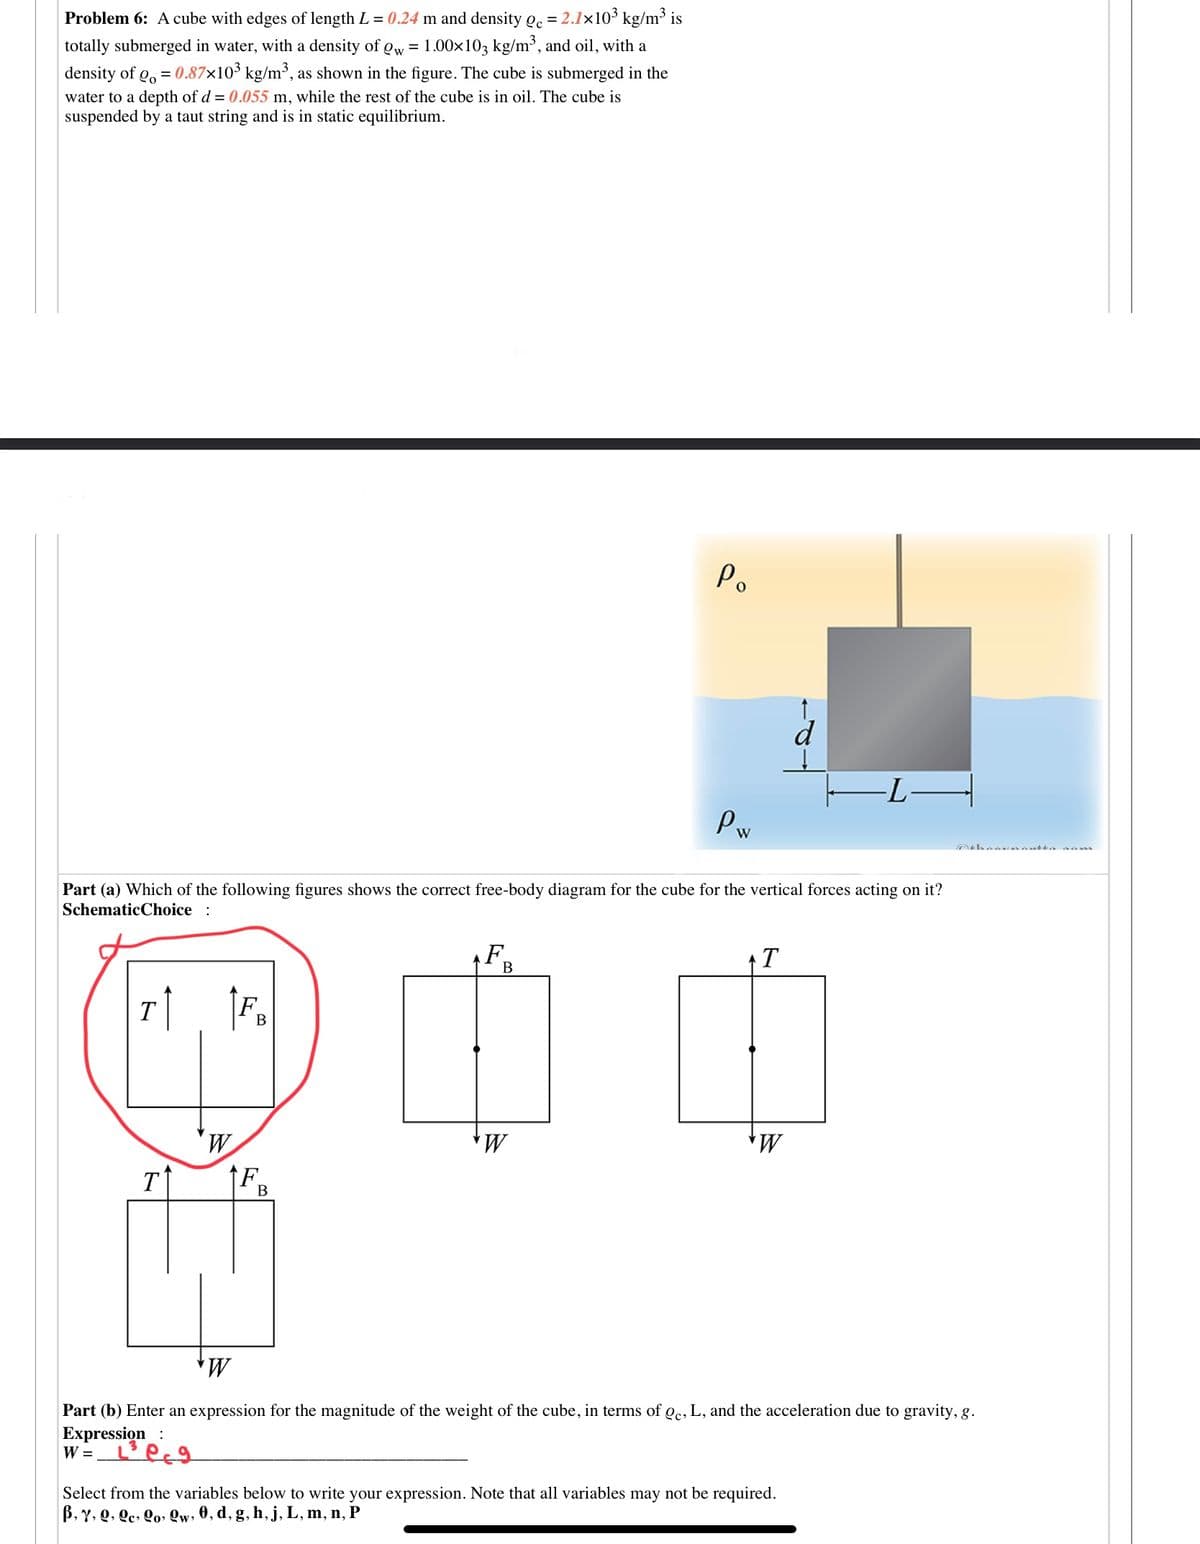 Problem 6: A cube with edges of length L = 0.24 m and density Qc = 2.1×103 kg/m³ is
totally submerged in water, with a density of Qw = 1.00x103 kg/m³, and oil, with a
density of g, = 0.87×10³ kg/m³, as shown in the figure. The cube is submerged in the
water to a depth of d = 0.055 m, while the rest of the cube is in oil. The cube is
suspended by a taut string and is in static equilibrium.
Po
d
-LH
Pw
Part (a) Which of the following figures shows the correct free-body diagram for the cube for the vertical forces acting on it?
SchematicChoice :
F
T
B
T
В
T
F.
В
Part (b) Enter an expression for the magnitude of the weight of the cube, in terms of oc, L, and the acceleration due to gravity, g.
Expression:
W =
Select from the variables below to write your expression. Note that all variables may not be required.
B, Y, Q, Qc, Qo» Qw, 0, d, g, h, j, L, m, n, P
